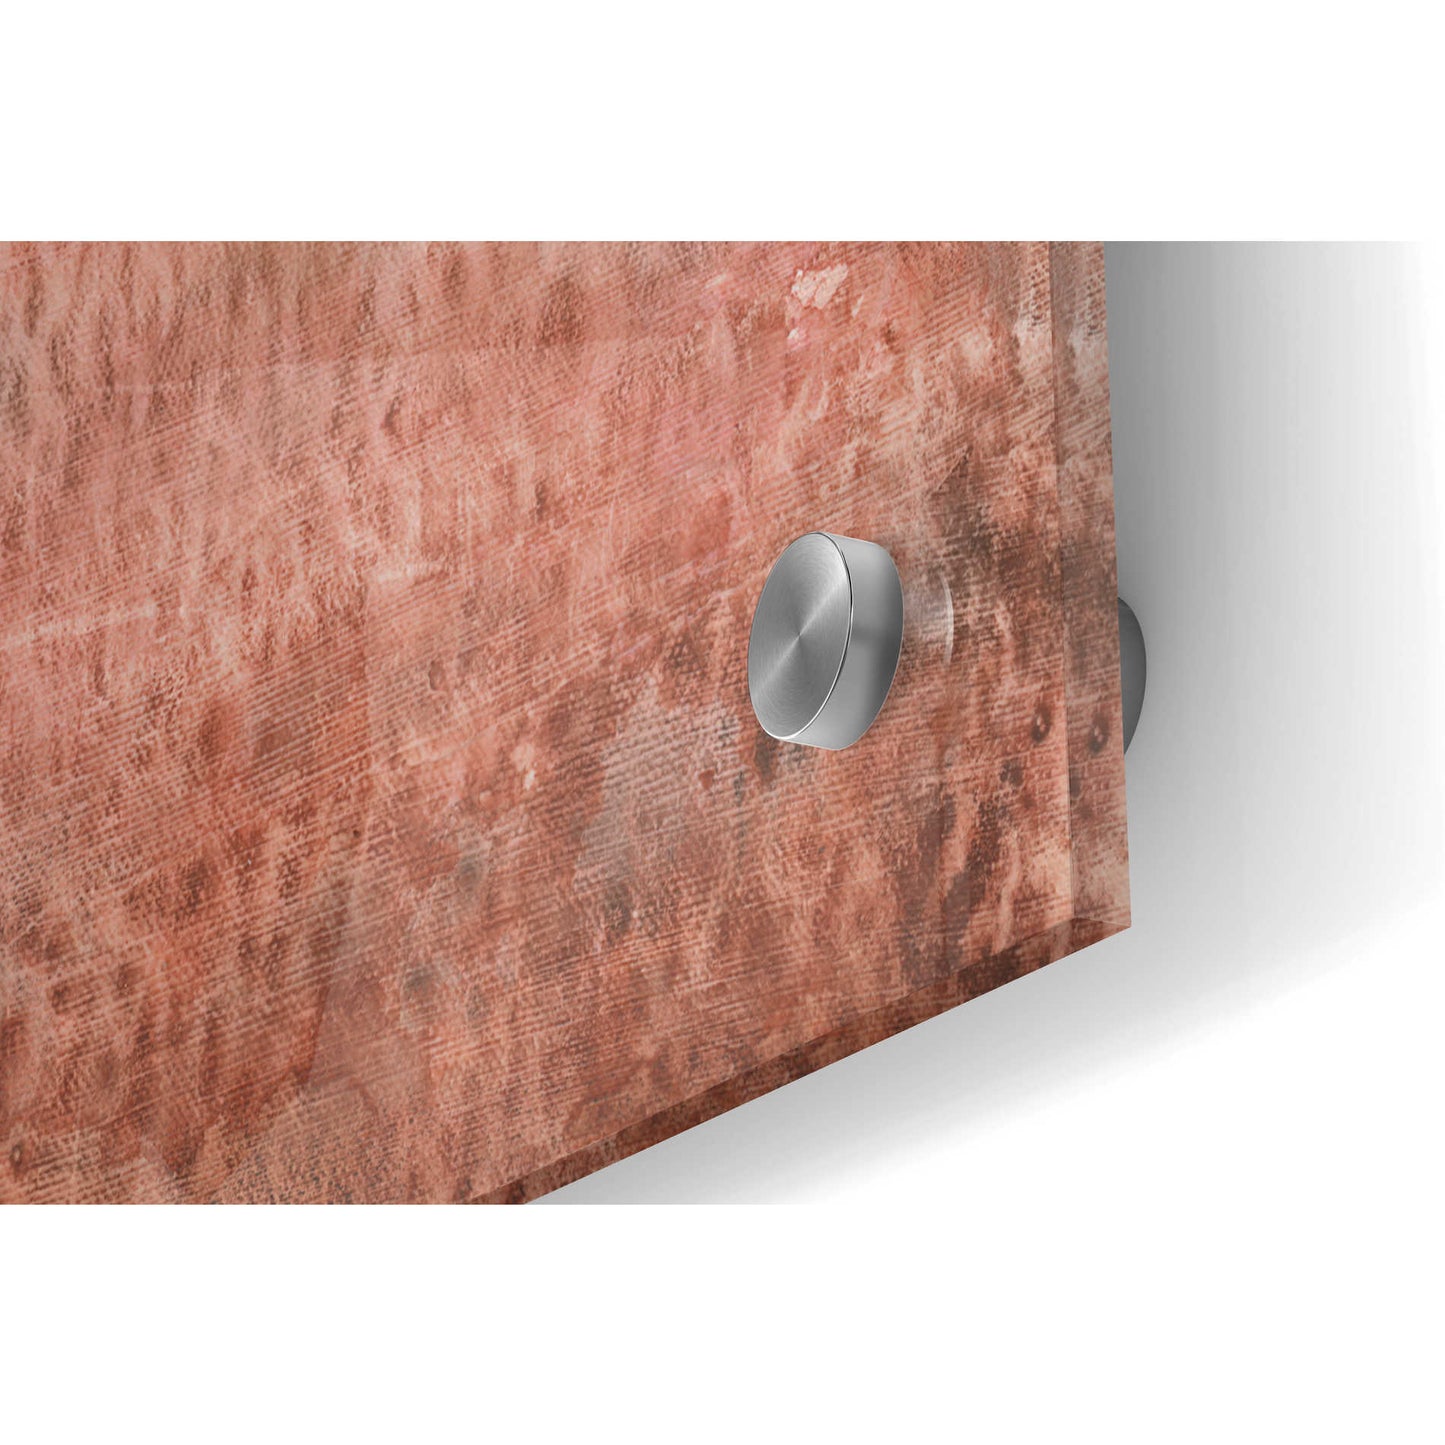 Epic Art 'Red Soil I' by Tim O'Toole, Acrylic Glass Wall Art,36x24